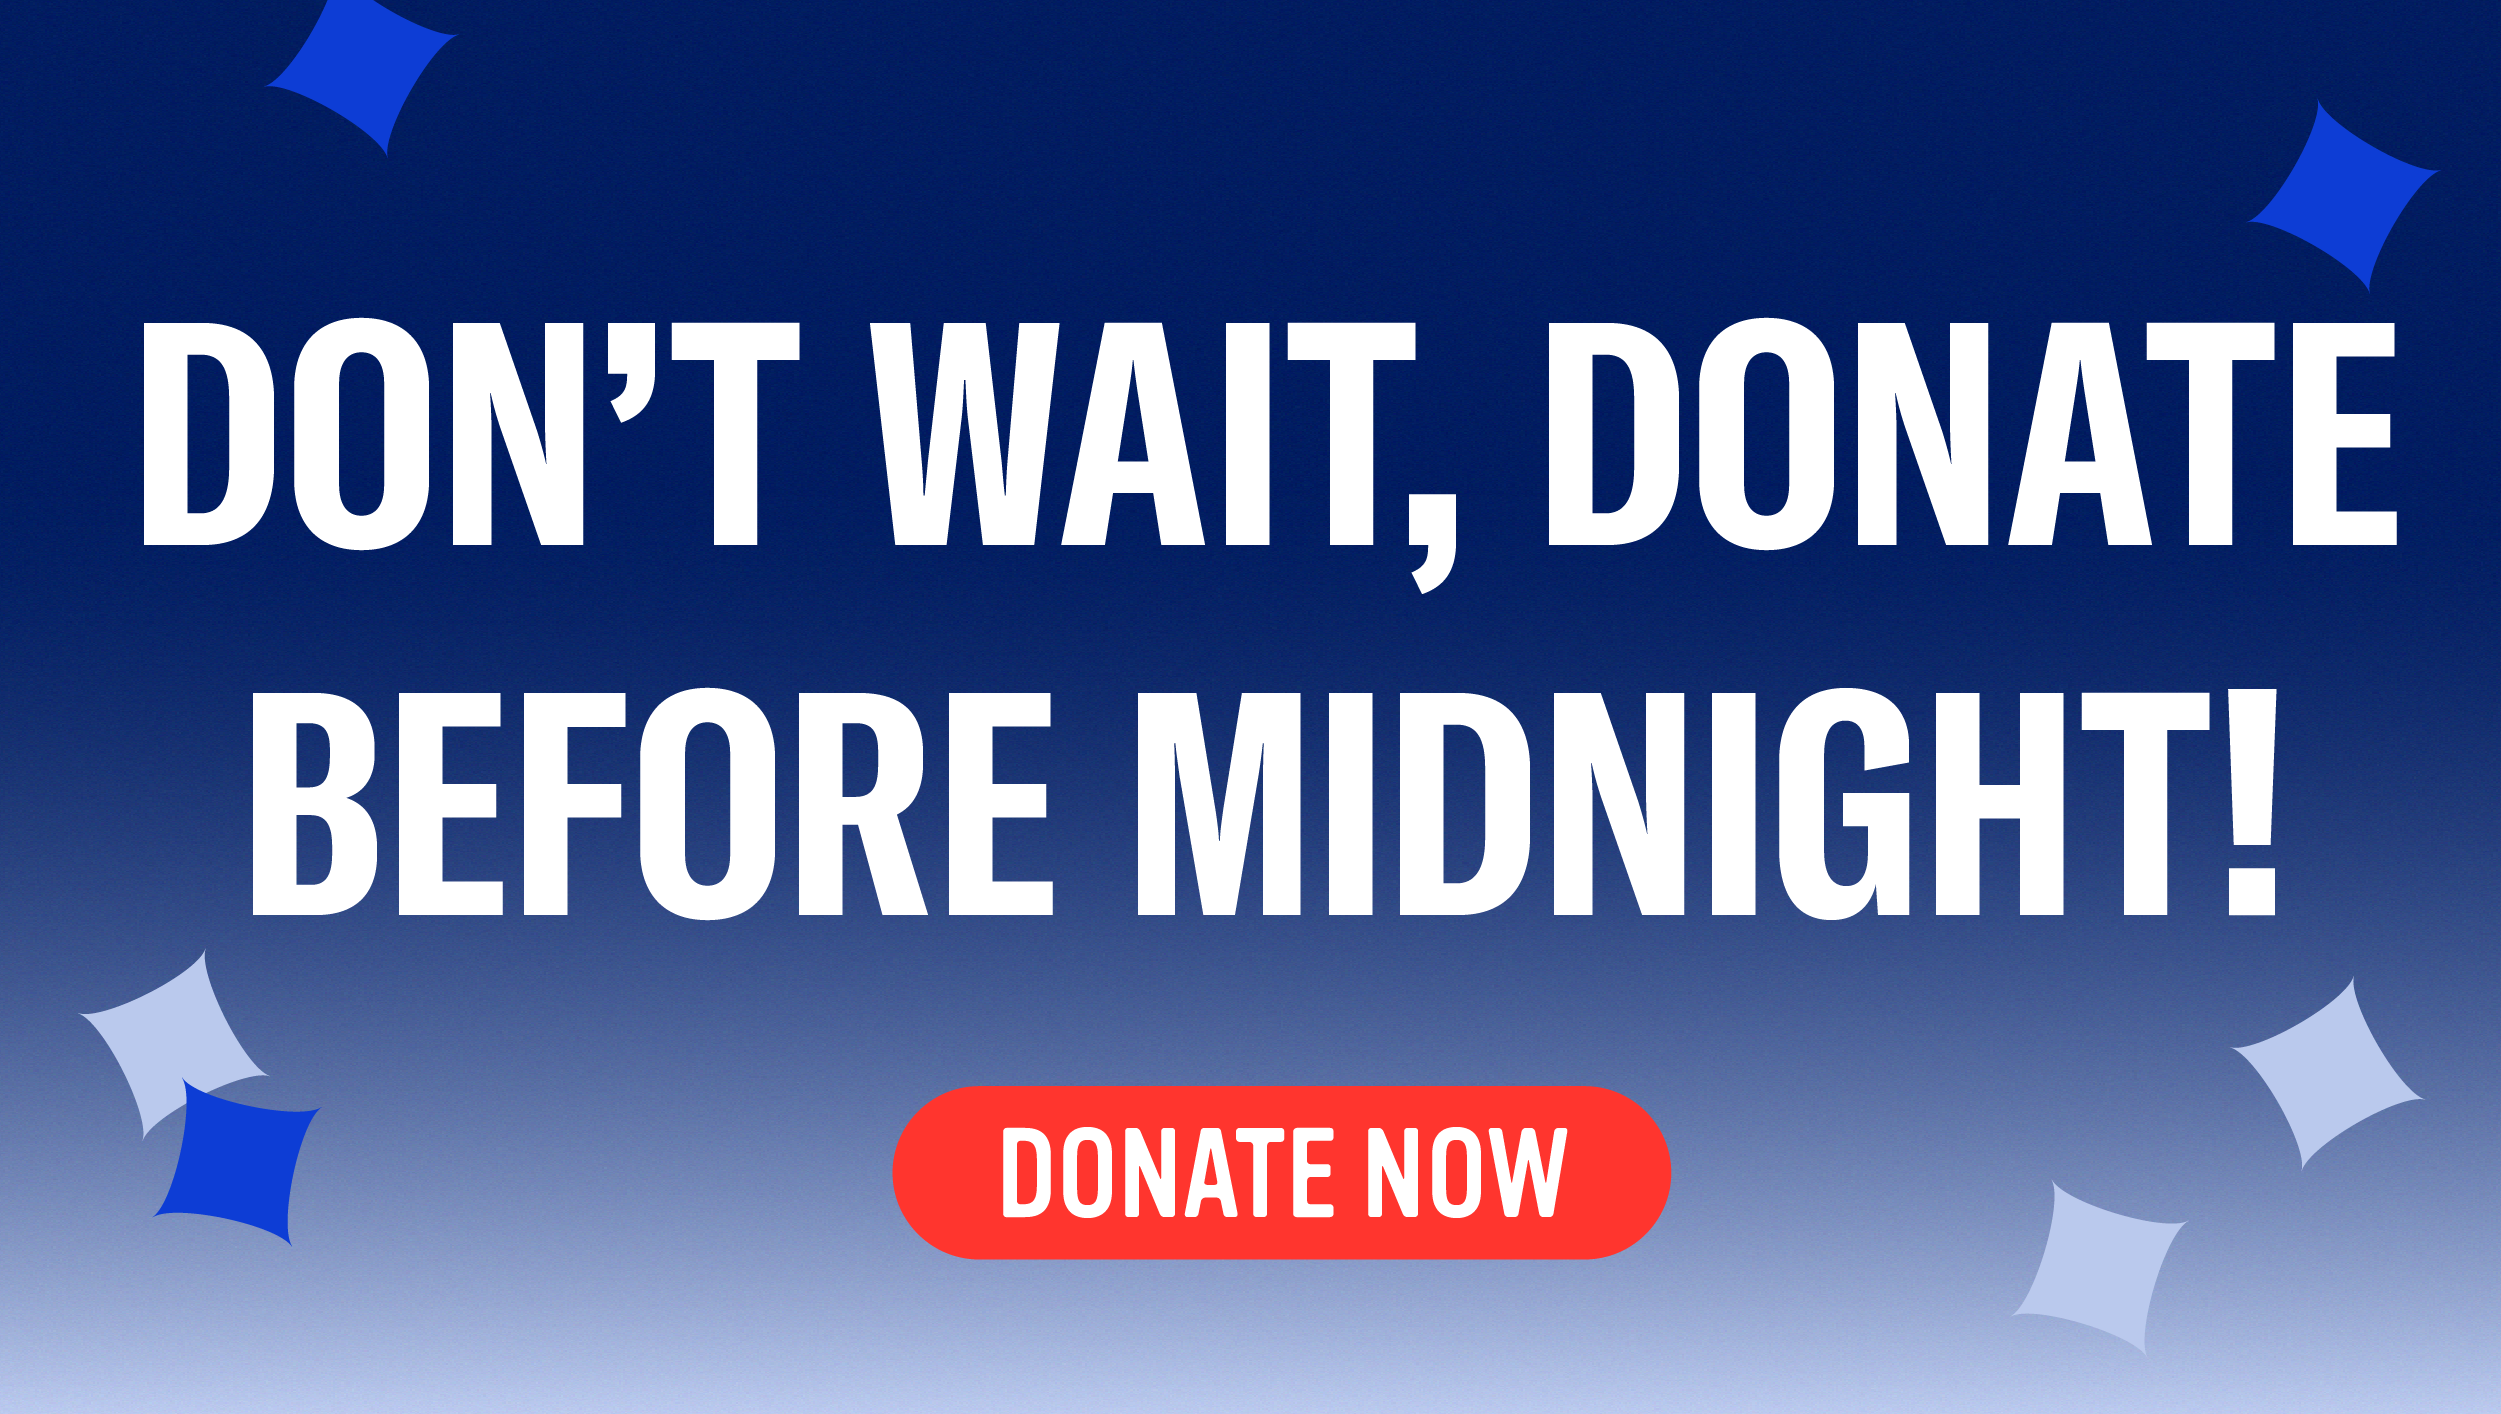 Don't wait, donate before midnight.